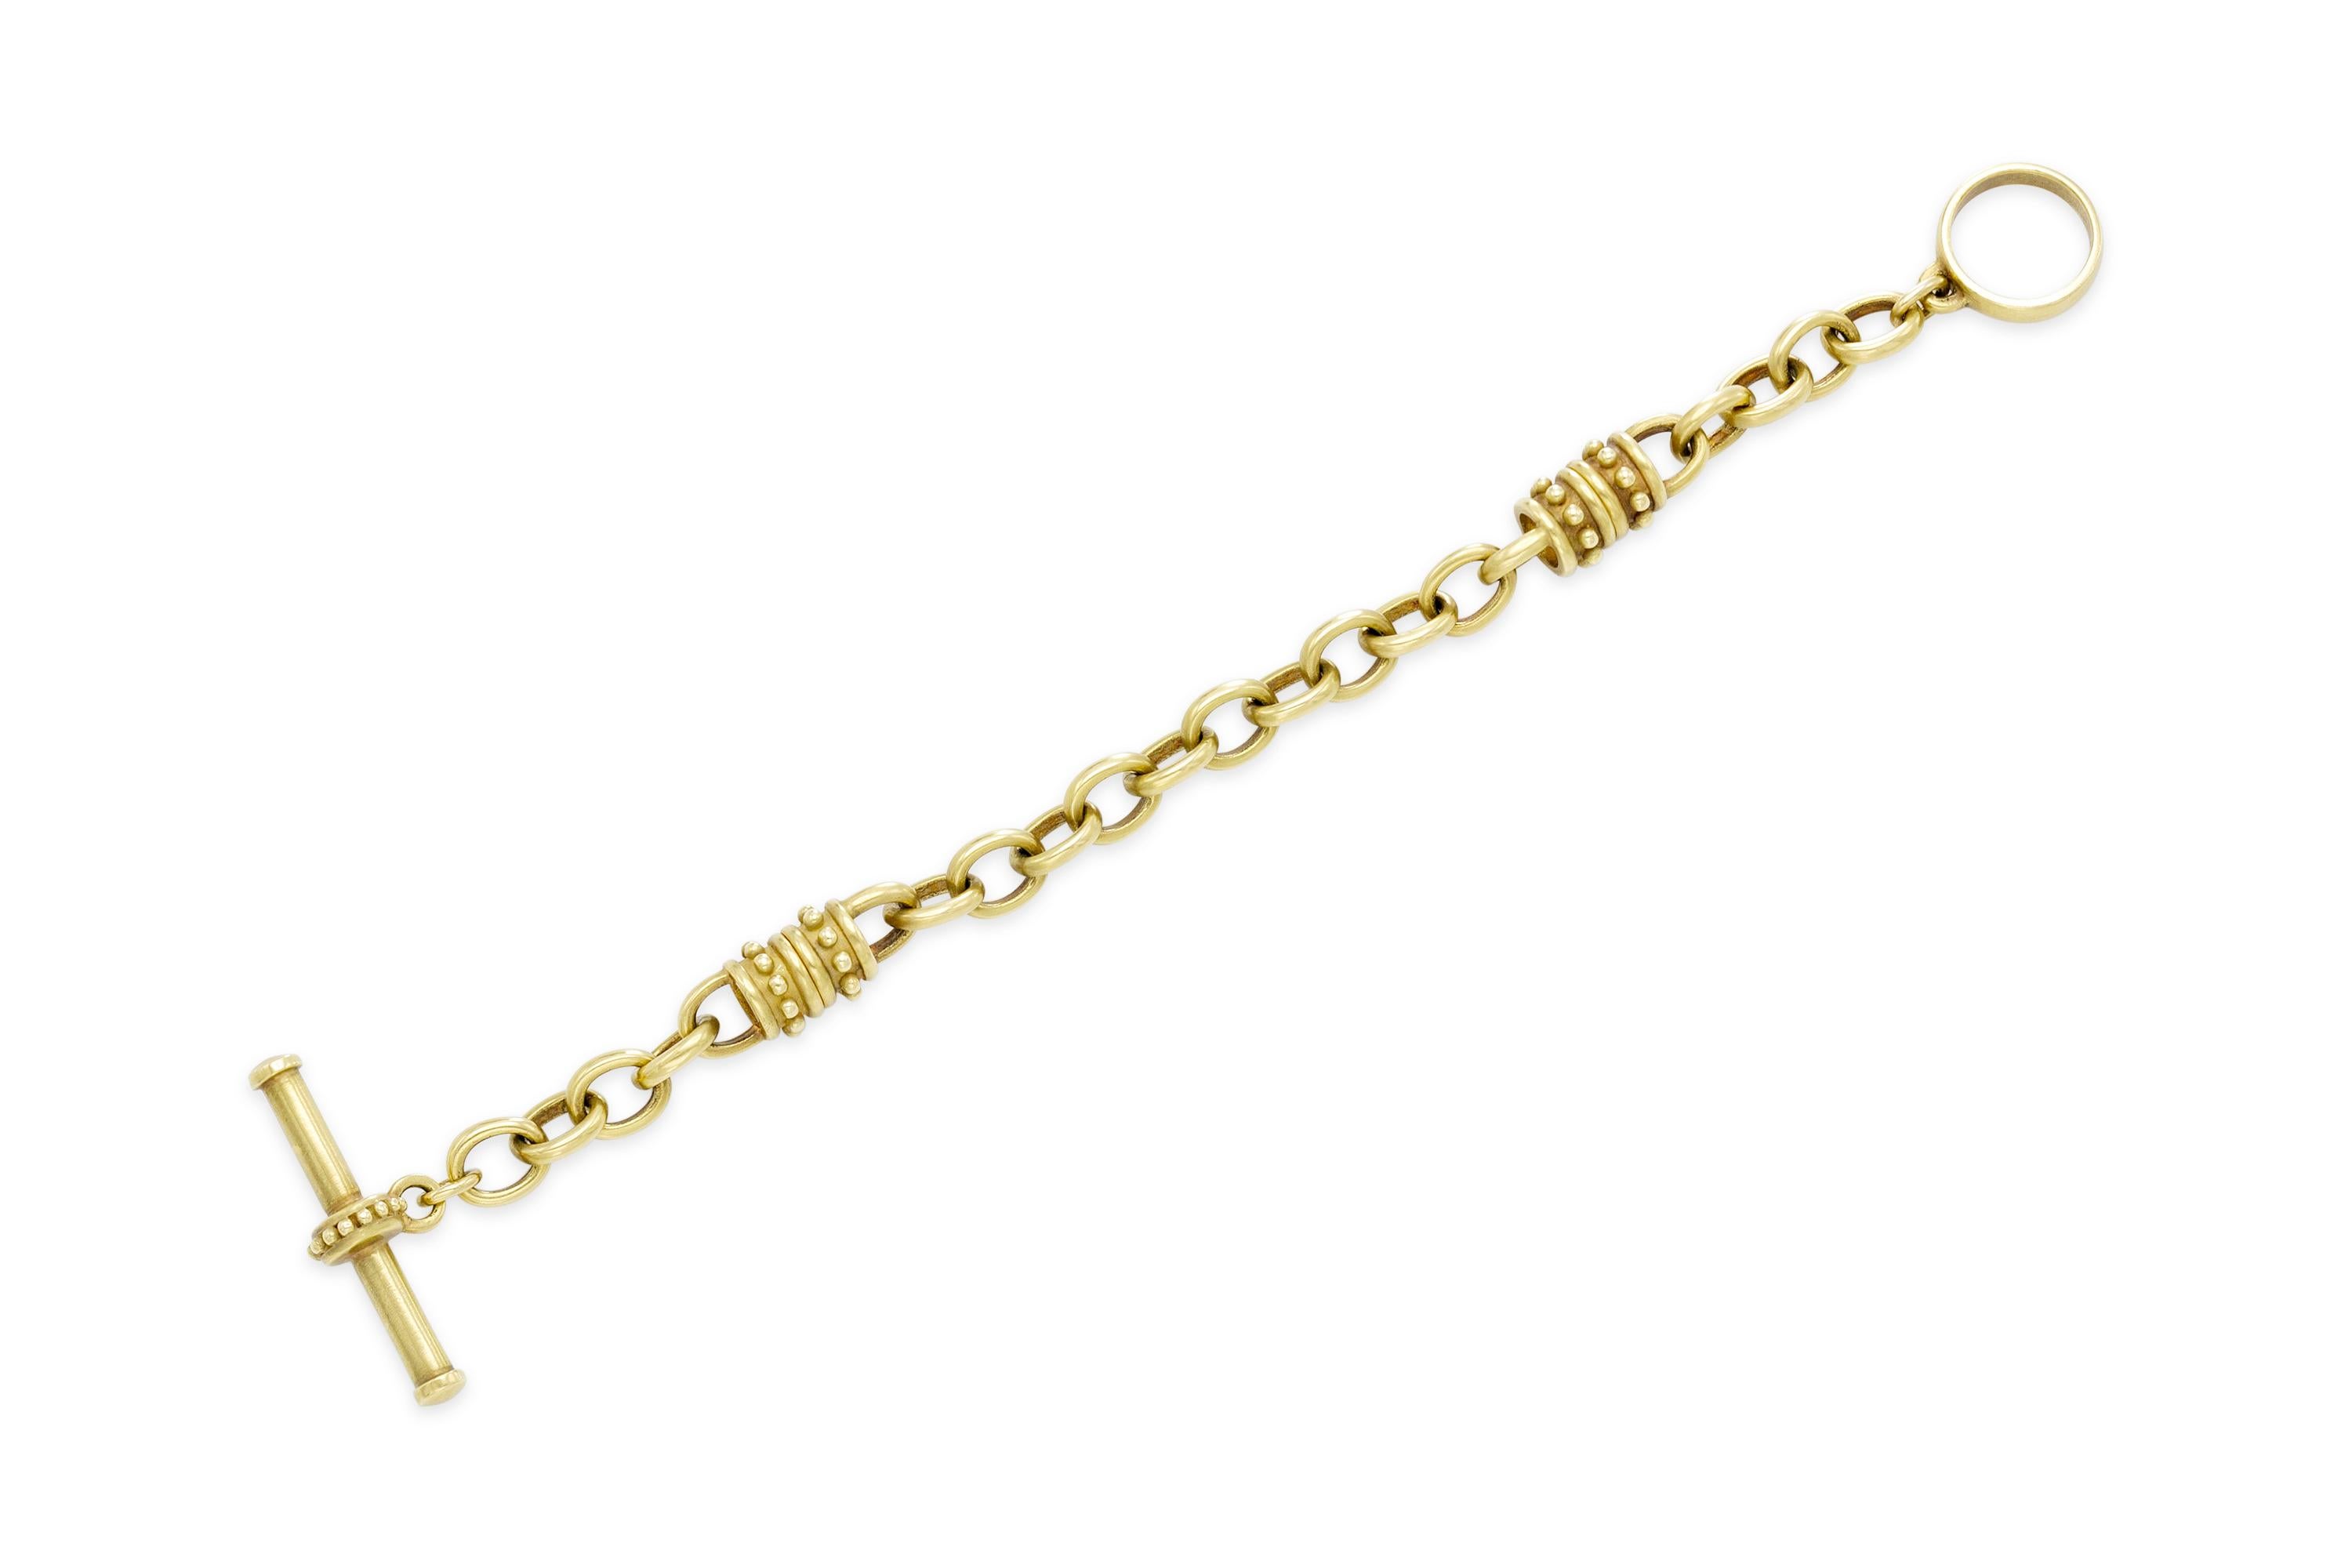 Finely crafted in 18k yellow gold.
Signed by Bvcciari
7 inches